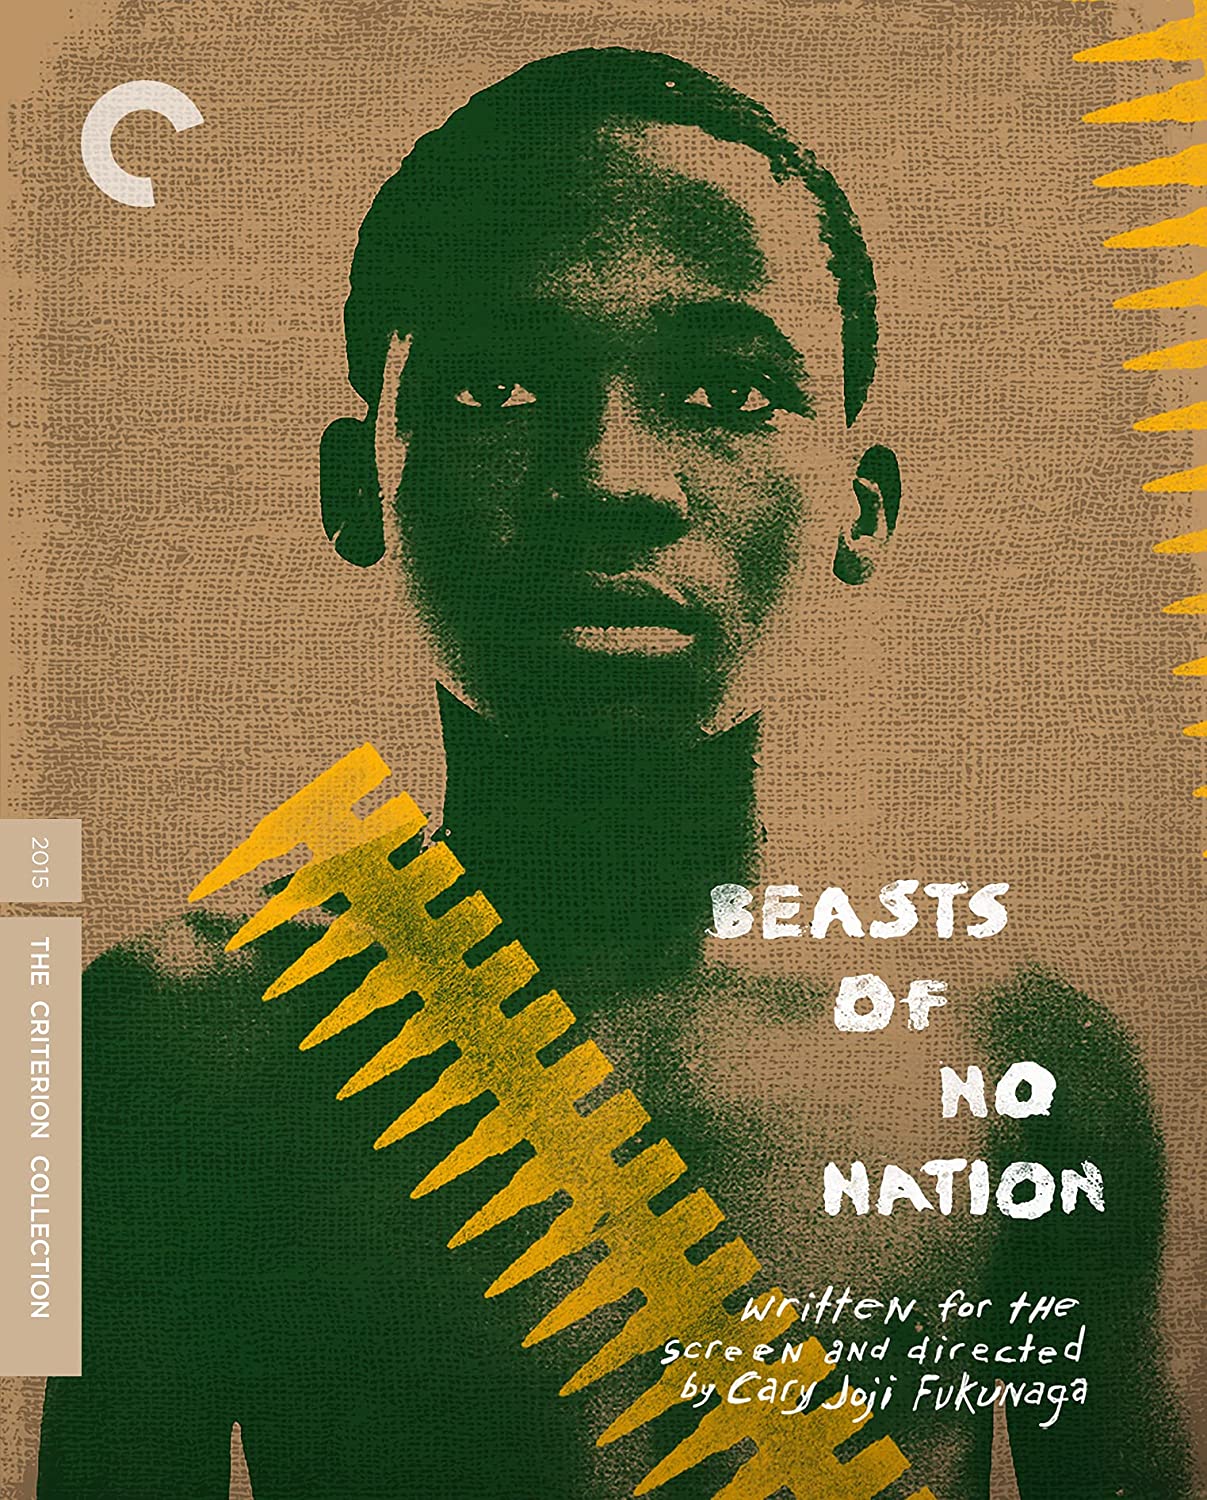 Beasts of No Nation [Criterion Collection] [Blu-ray] cover art